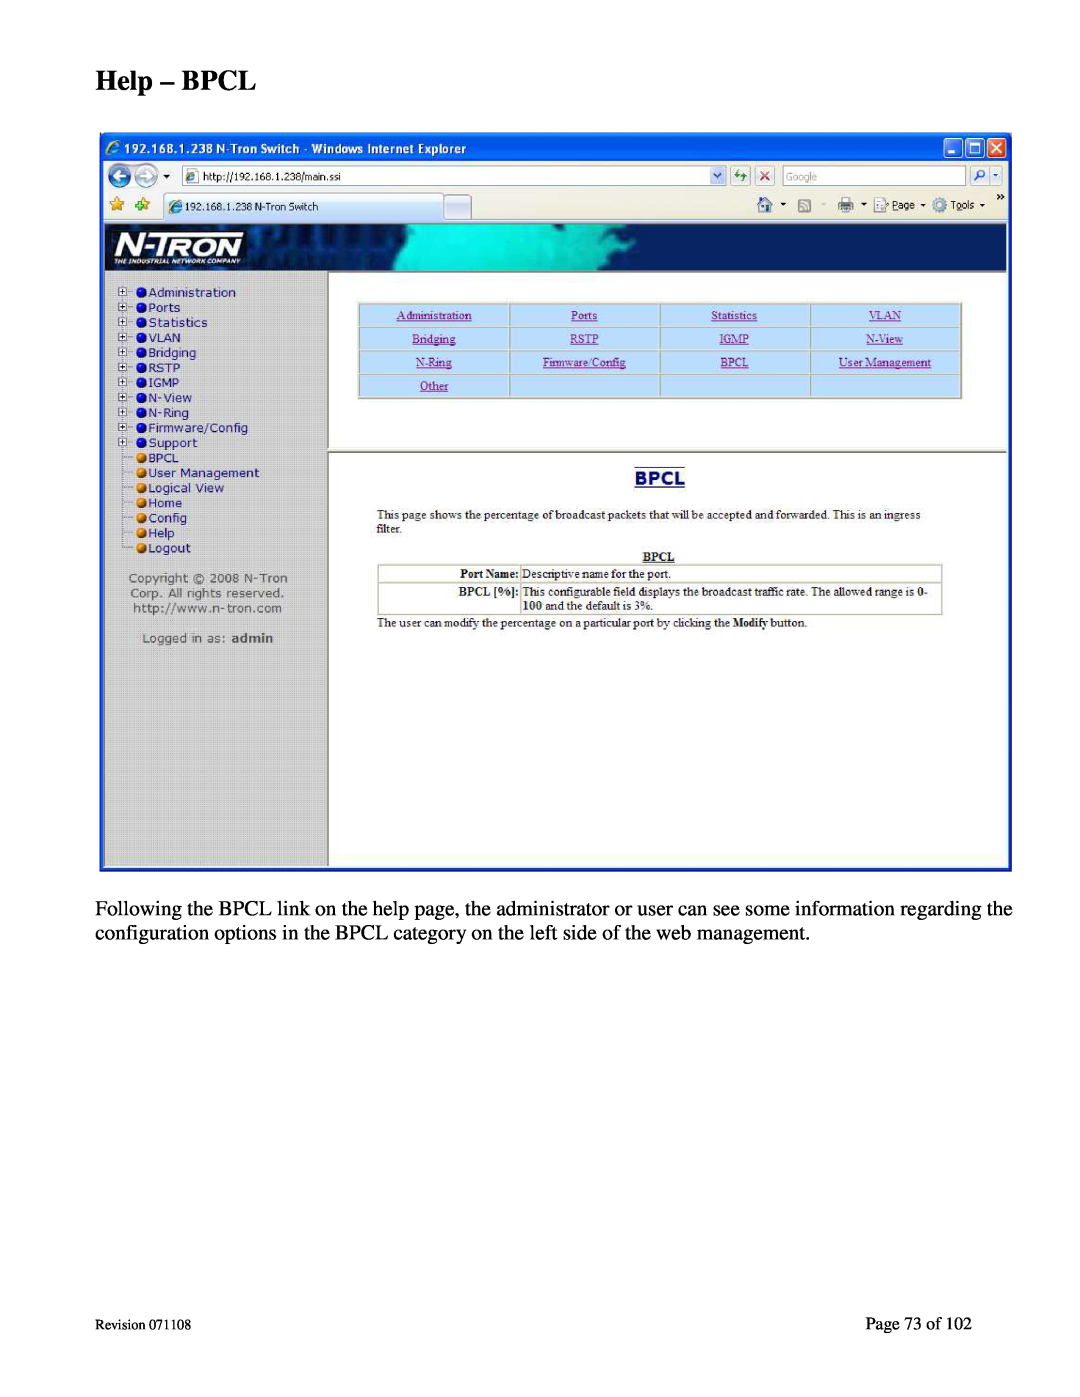 N-Tron 708M12 user manual Help - BPCL, Page 73 of, Revision 